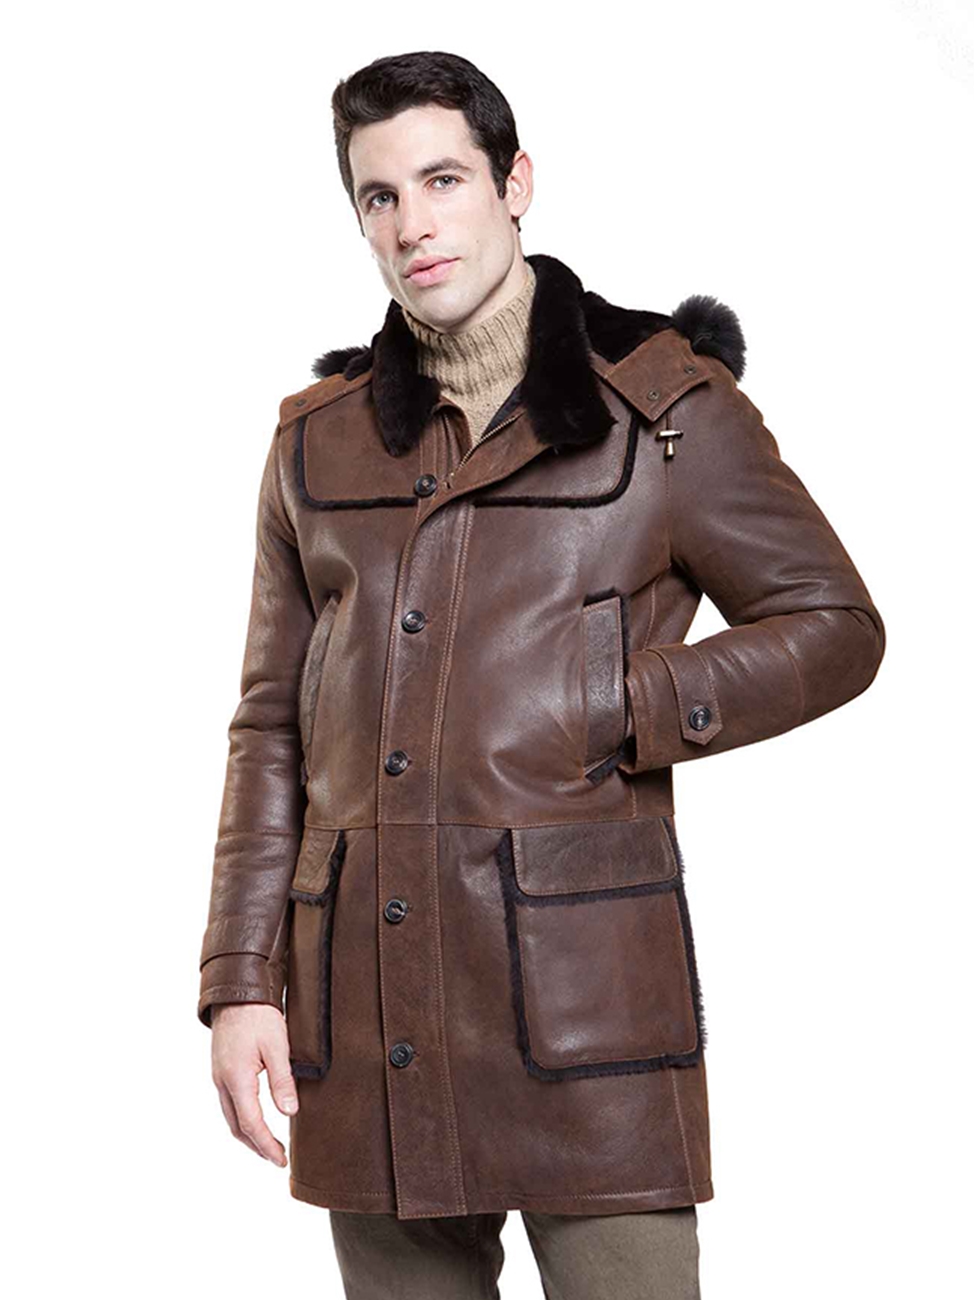 Rugged Cocoa Valier Mens Shearling Jacket | Aston Leather Shearling ...